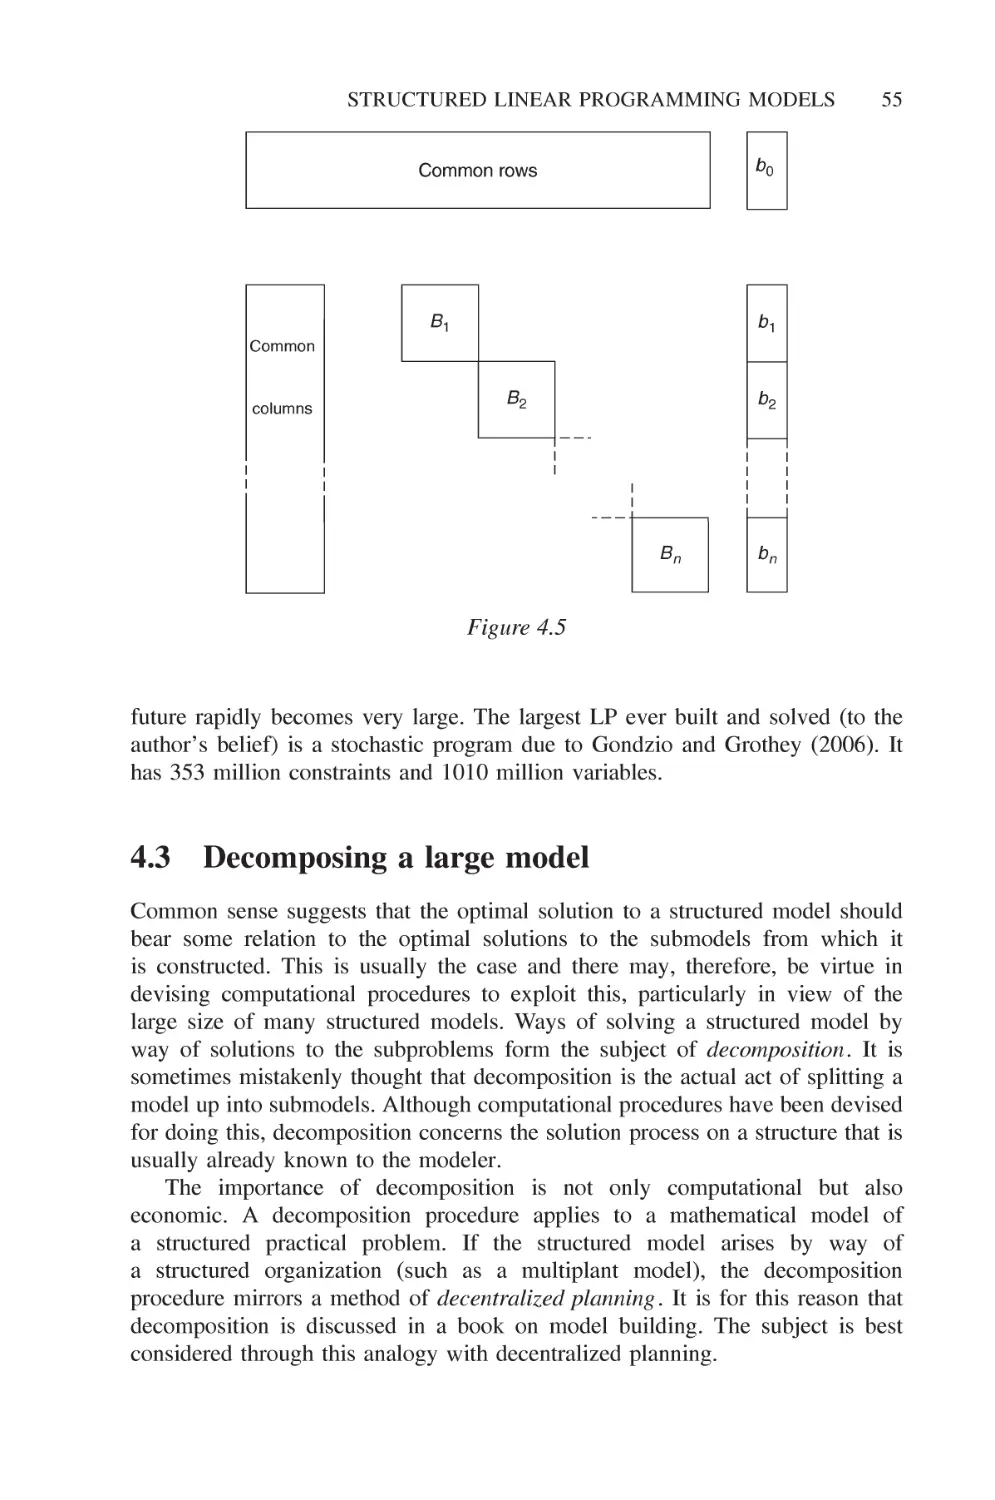 4.3 Decomposing a large model